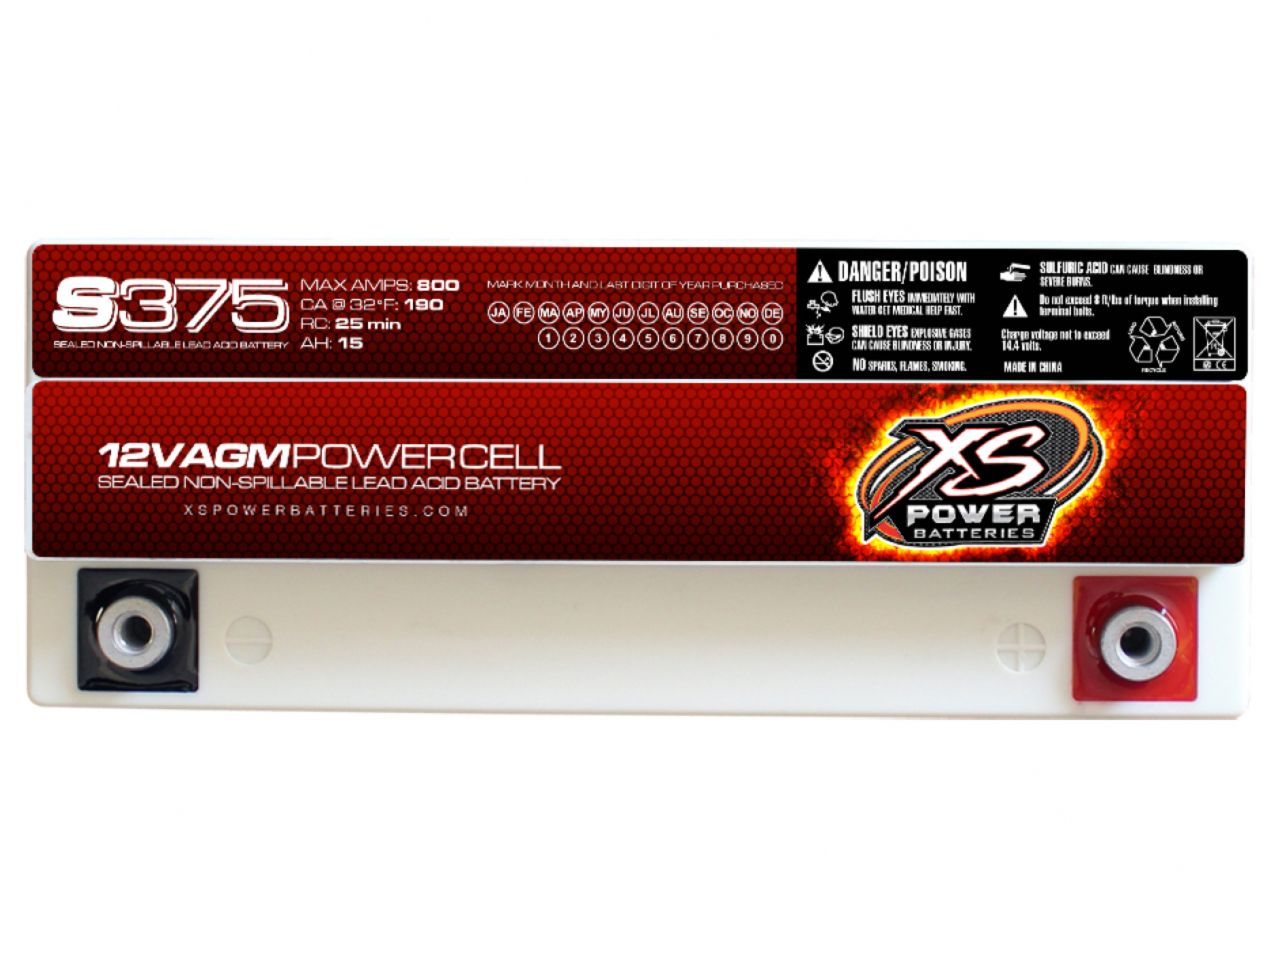 XS Power 12V AGM Starting Battery, Max Amps 800A, CA: 190A